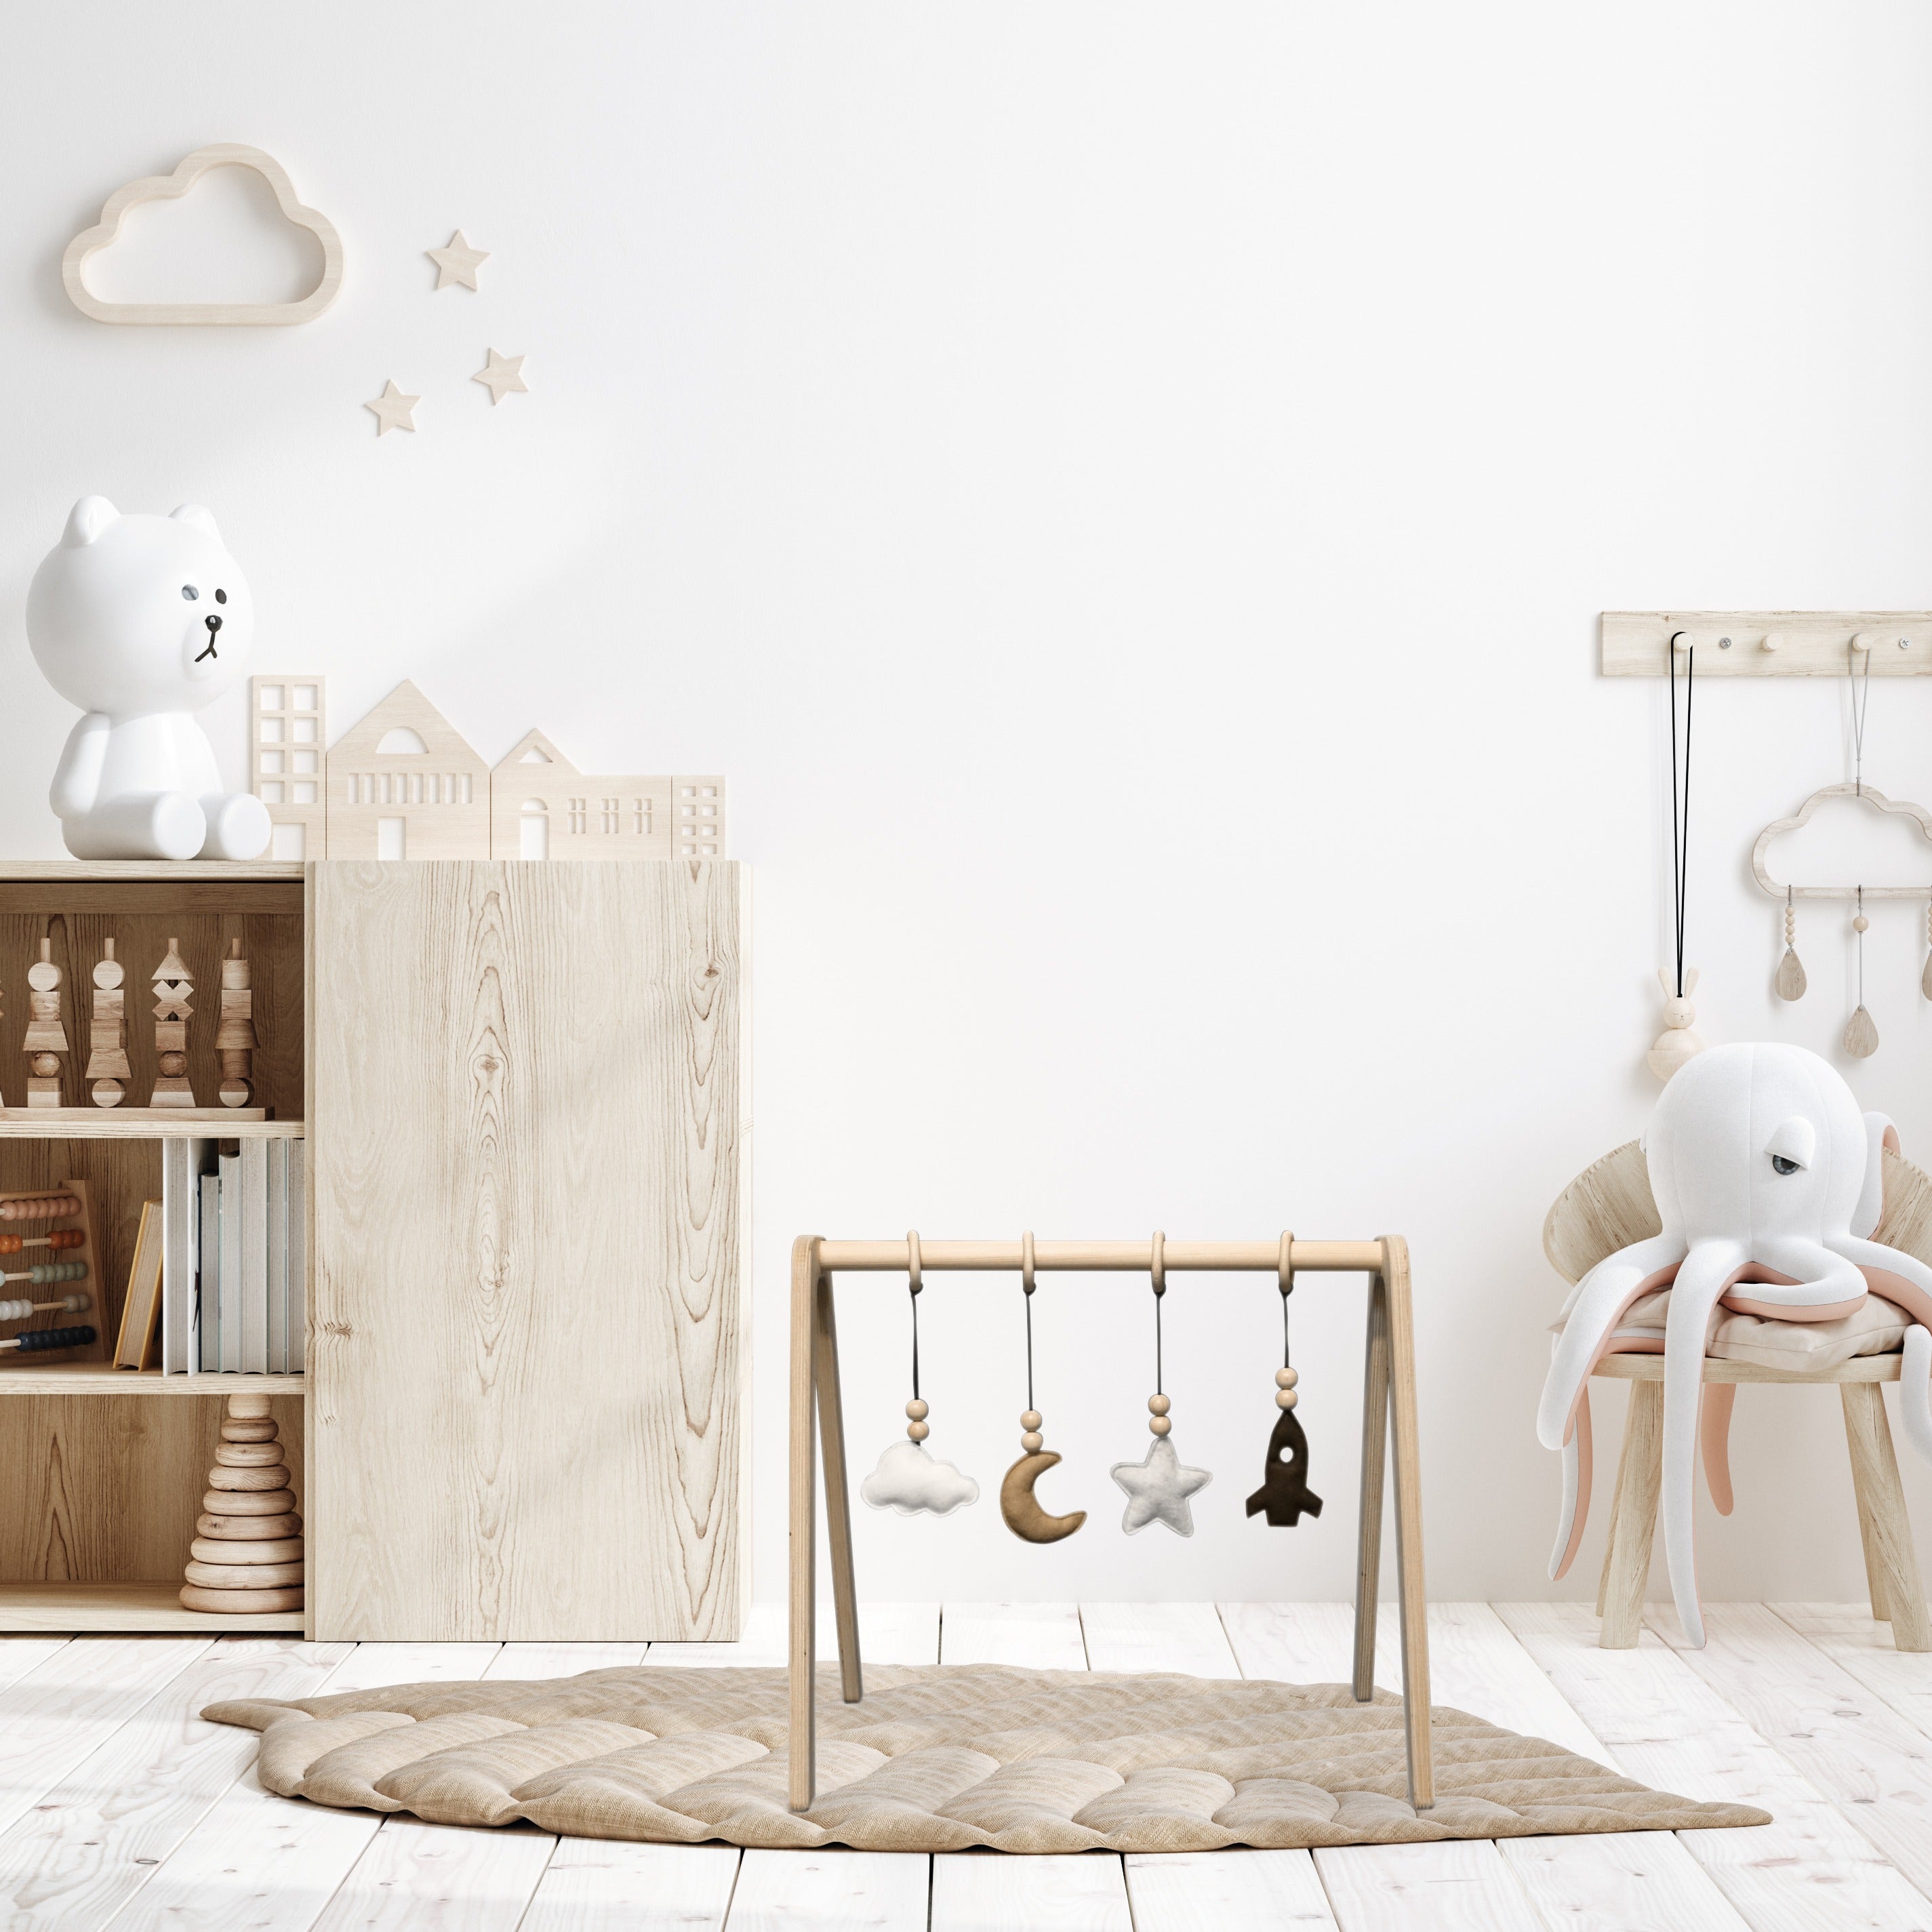 Wooden baby gym, play arch, solid wood - toddie.com